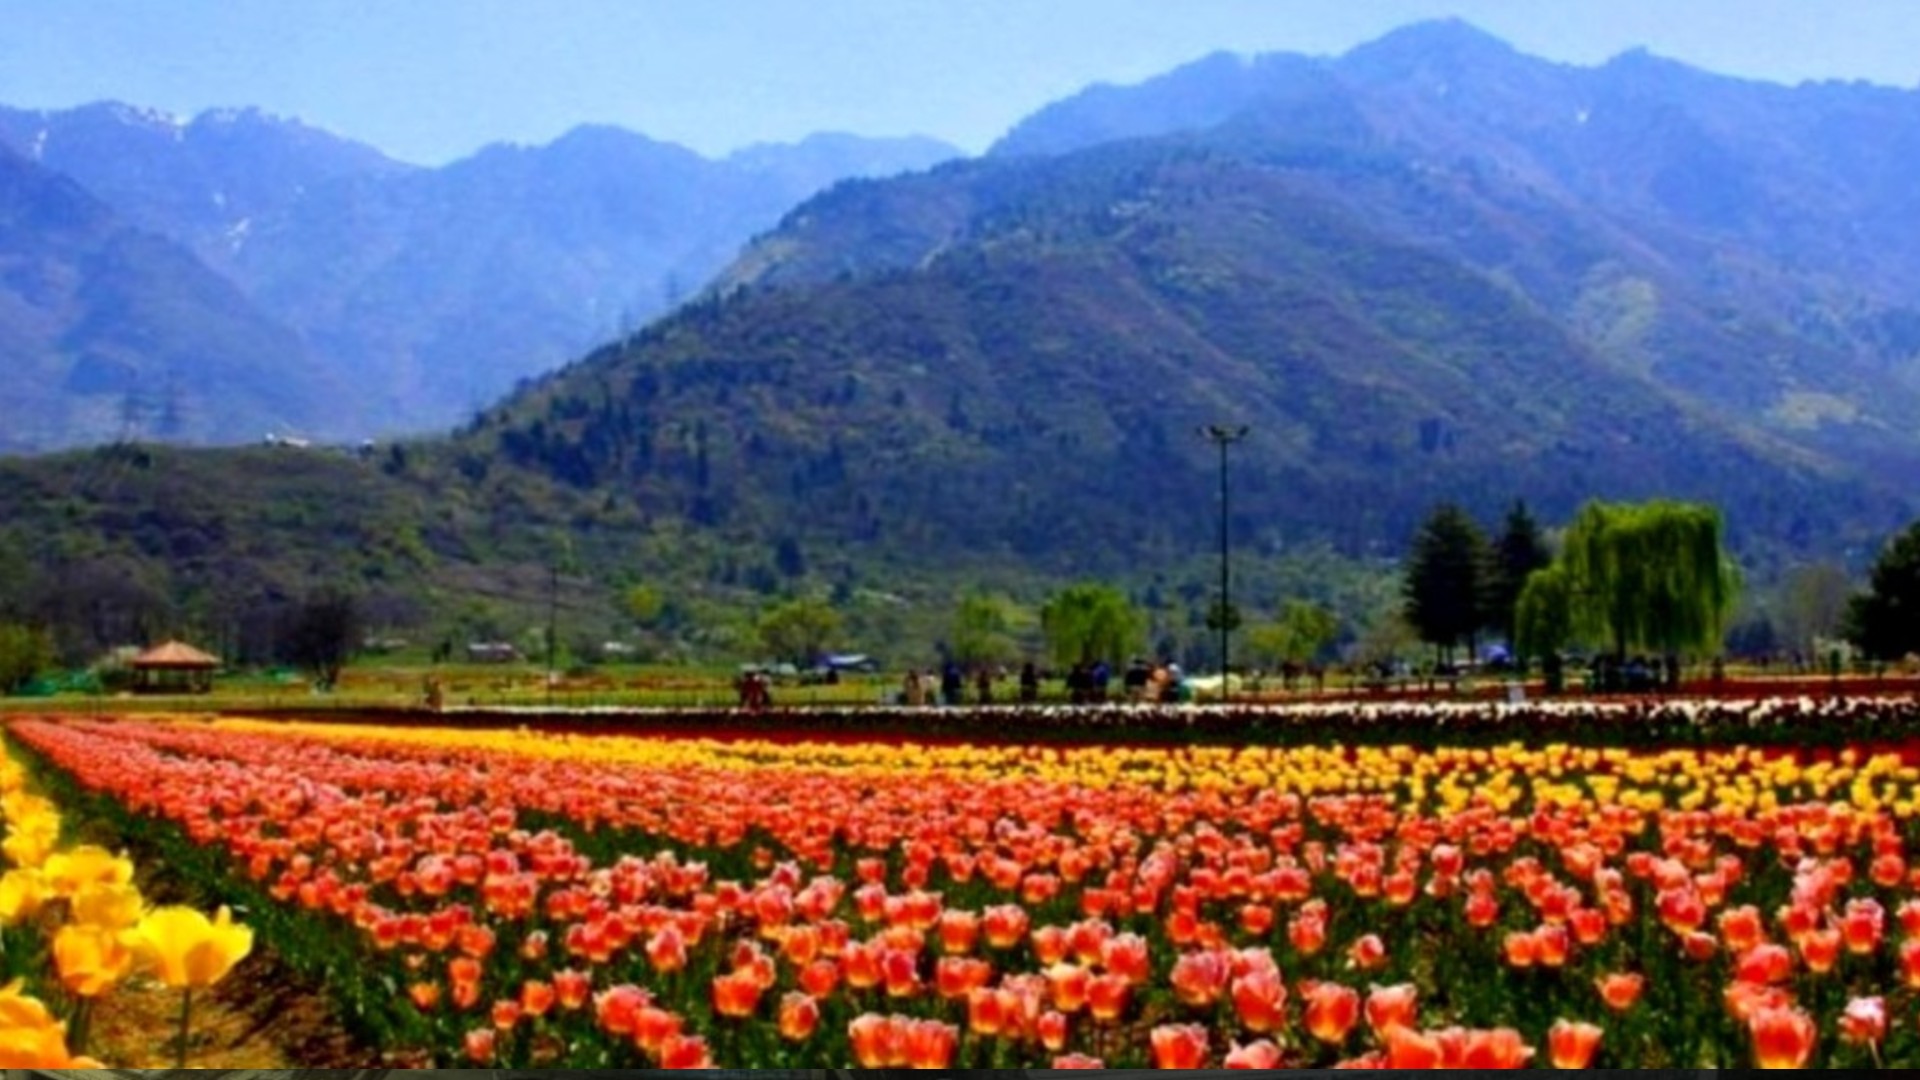 Asia’s Largest Tulip Garden In Srinagar Welcomes 50,000 Visitors In Just 5 Days